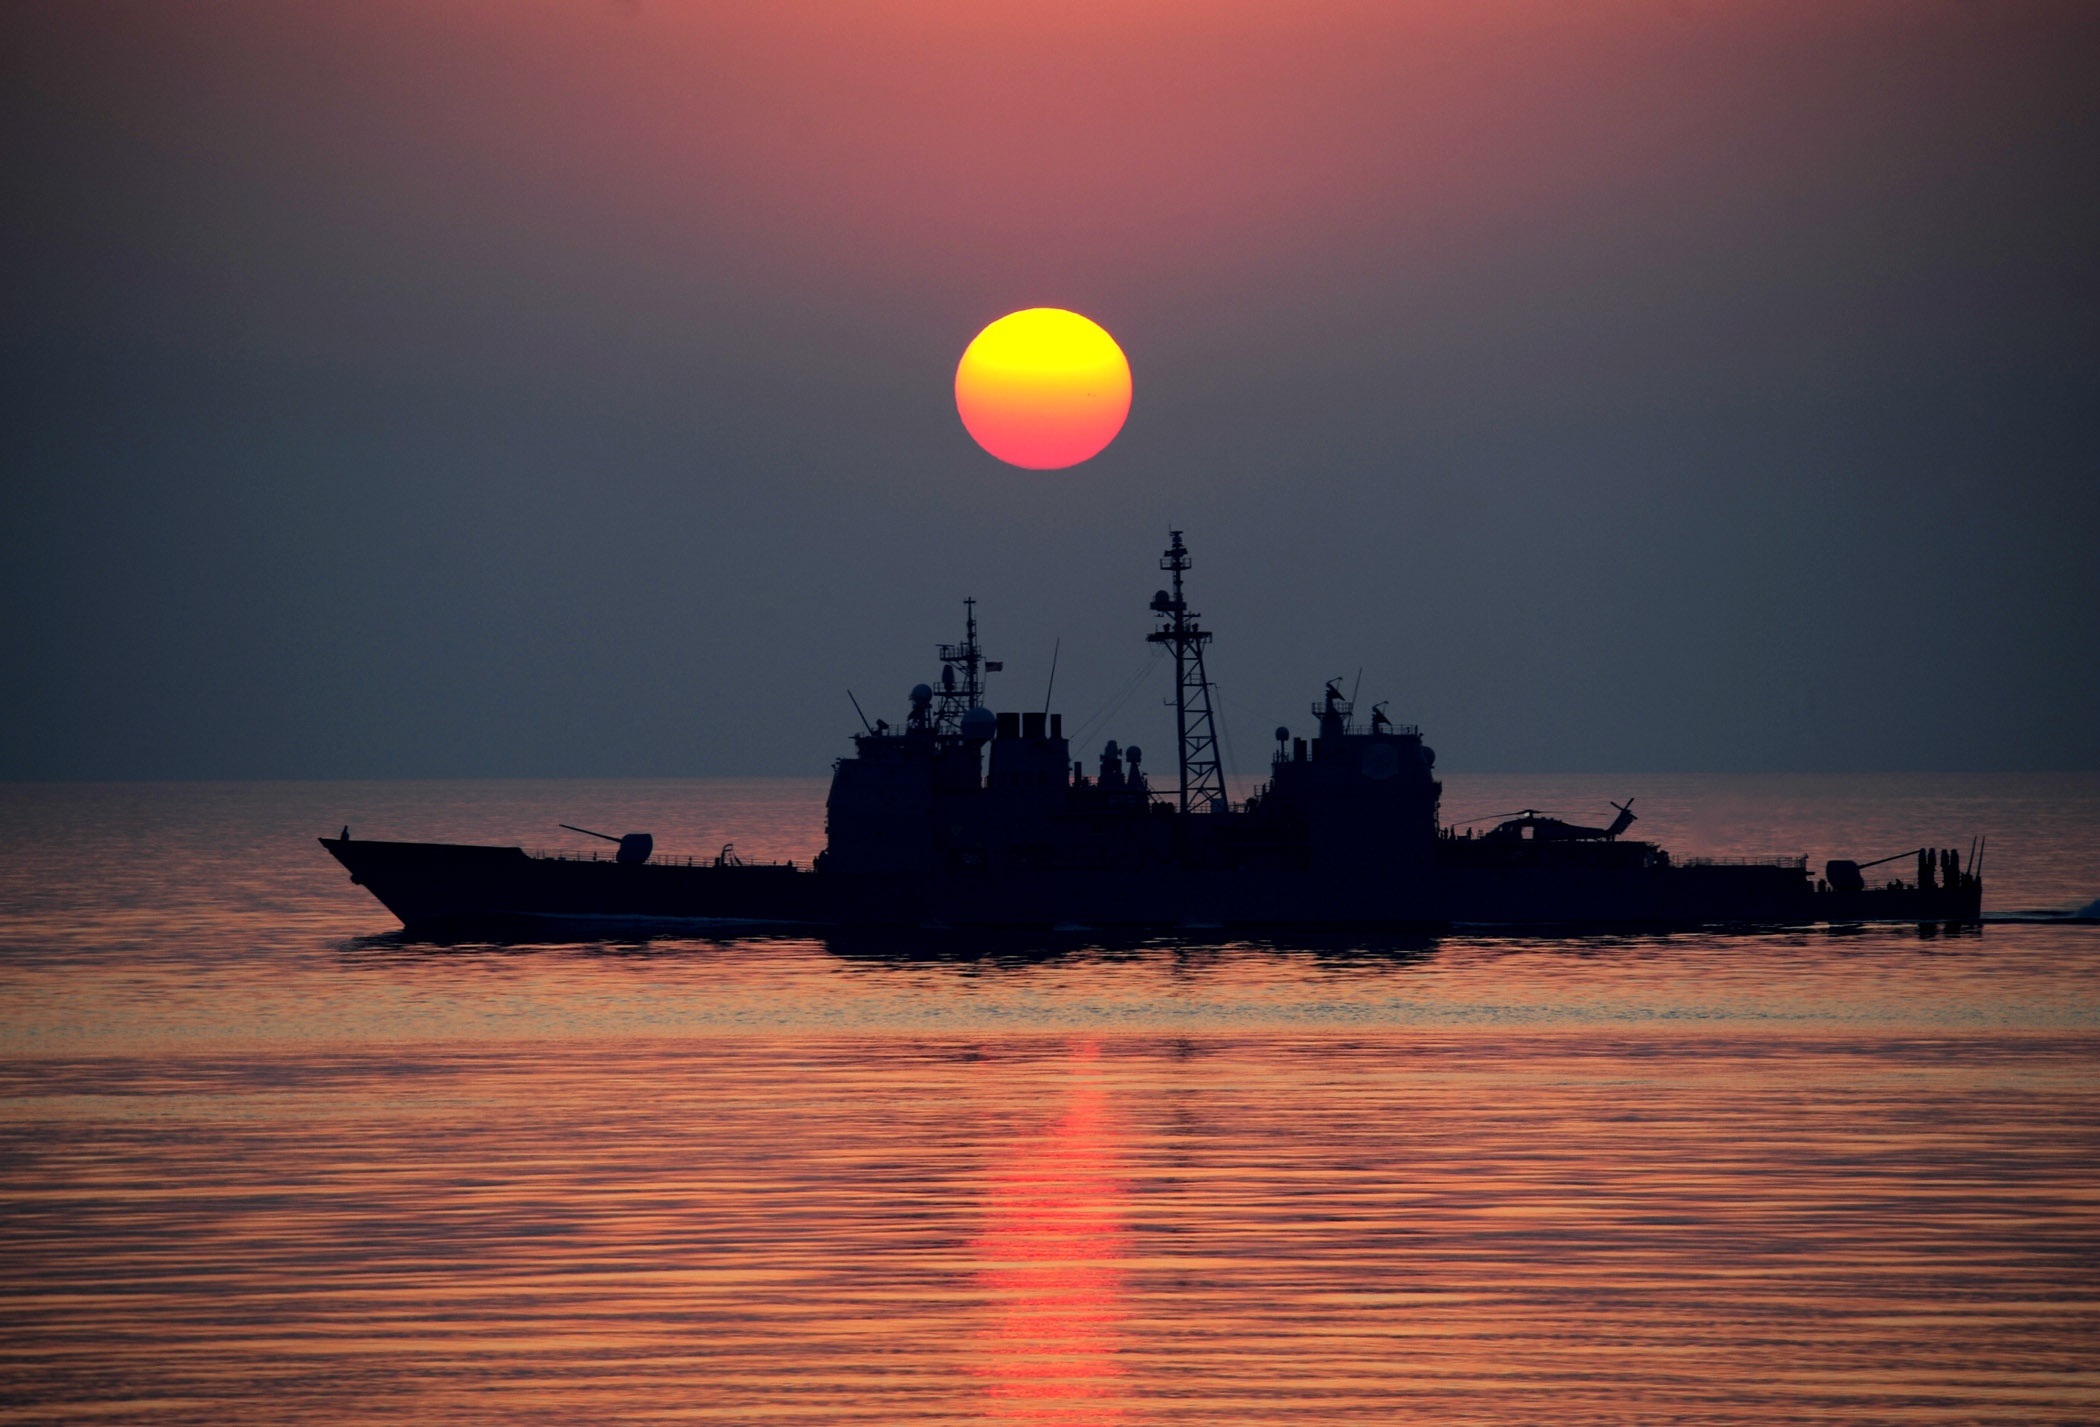 Guided Missile Cruiser Military Navy Ship Silhouette Sunset Uss Mobile Bay Cg 53 United States Navy 2100x1427